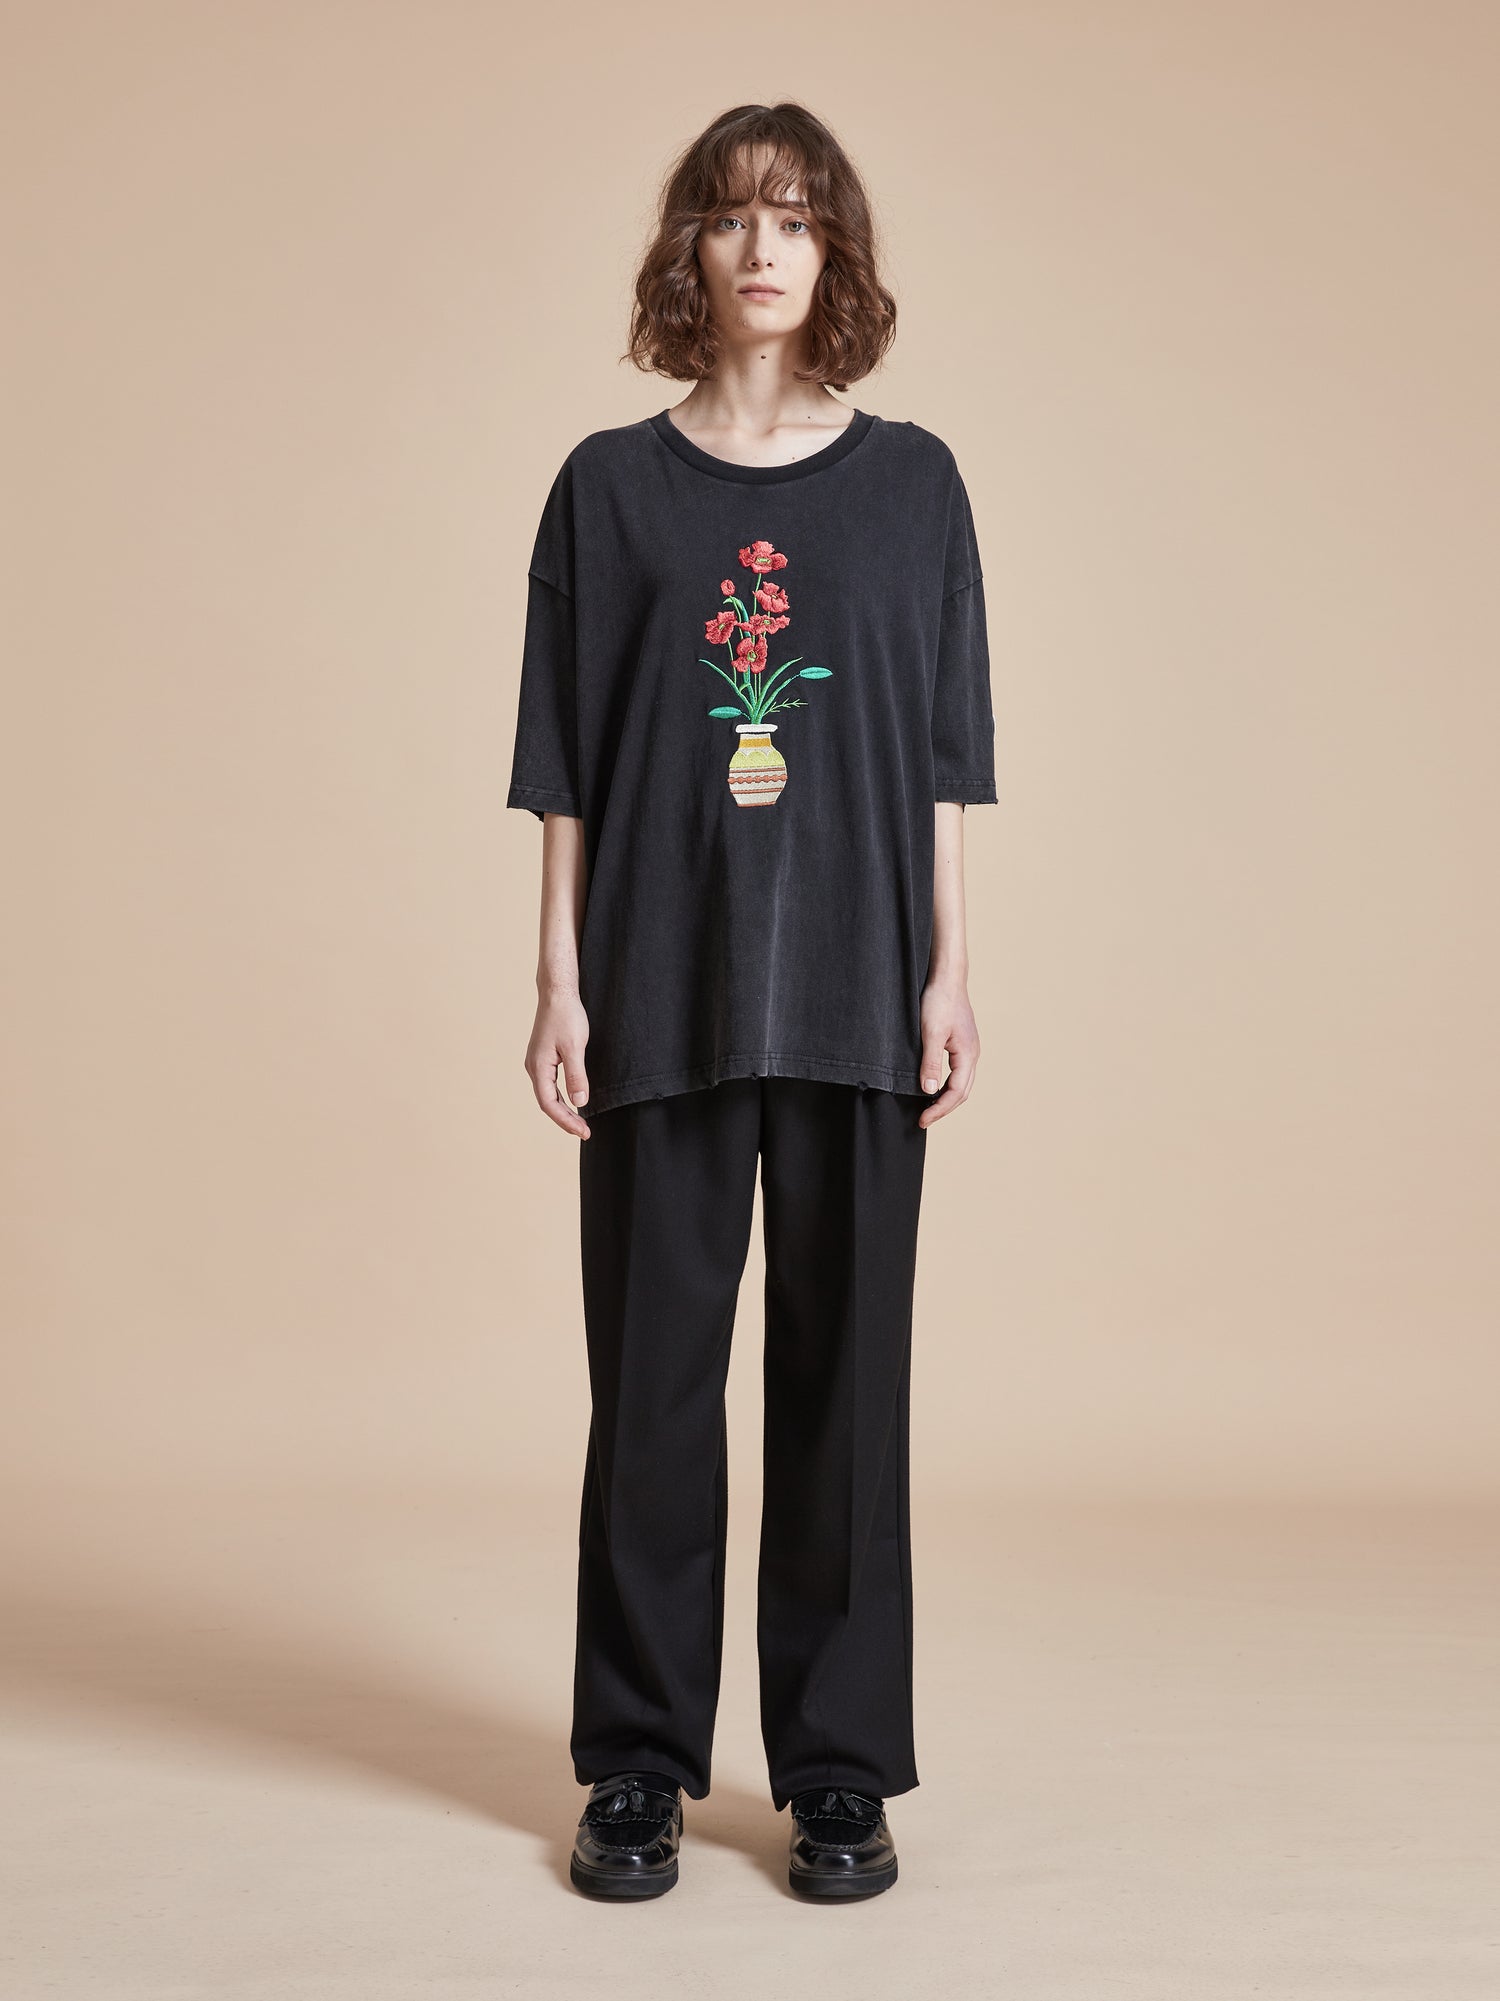 A woman wearing a Found Flowers Vase Tee.